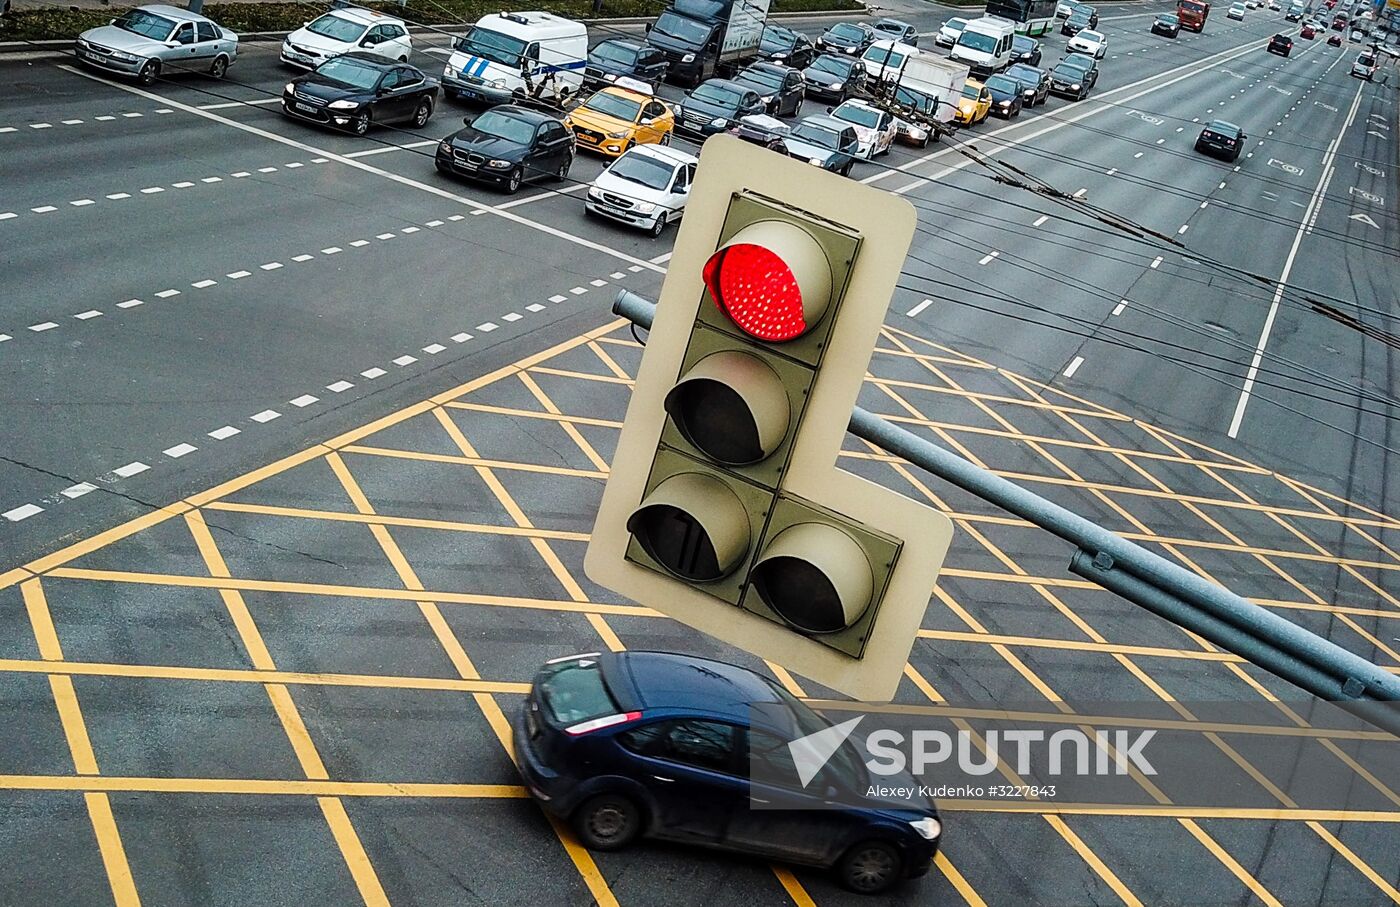 New yellow box markings at intersections in Moscow